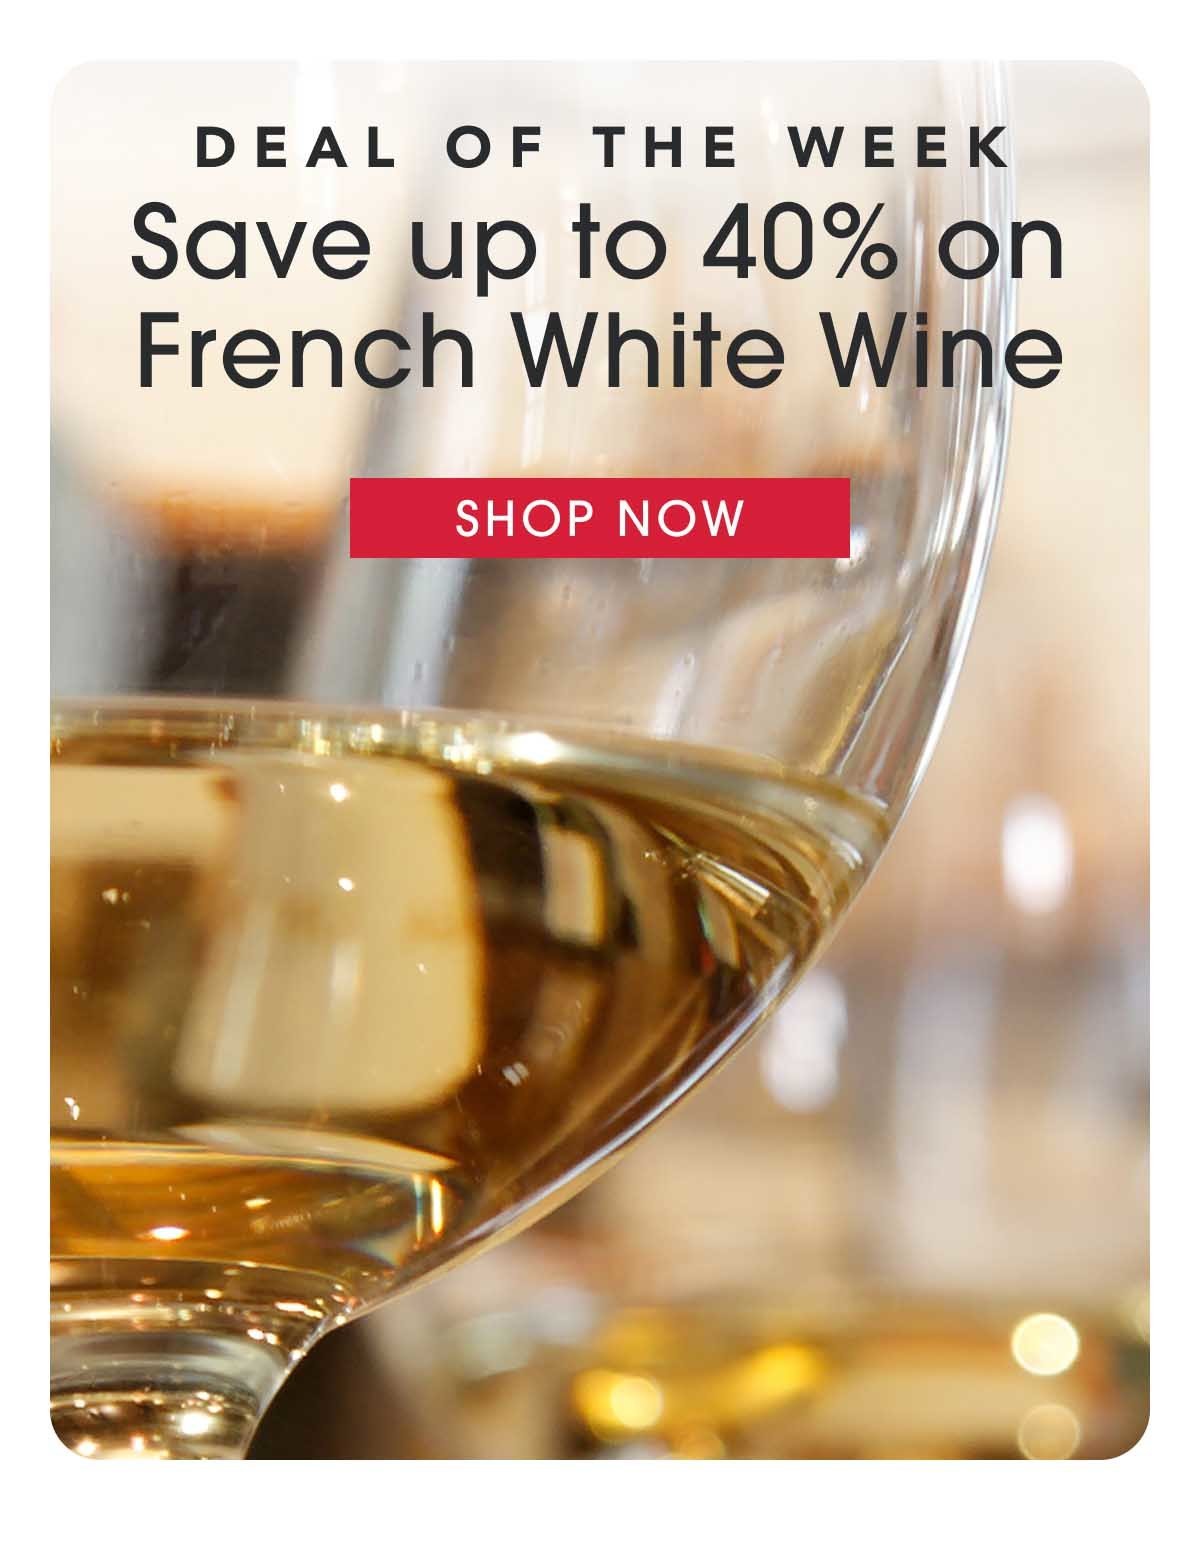 Deal of the Week - Save up to 40% on French White Wine